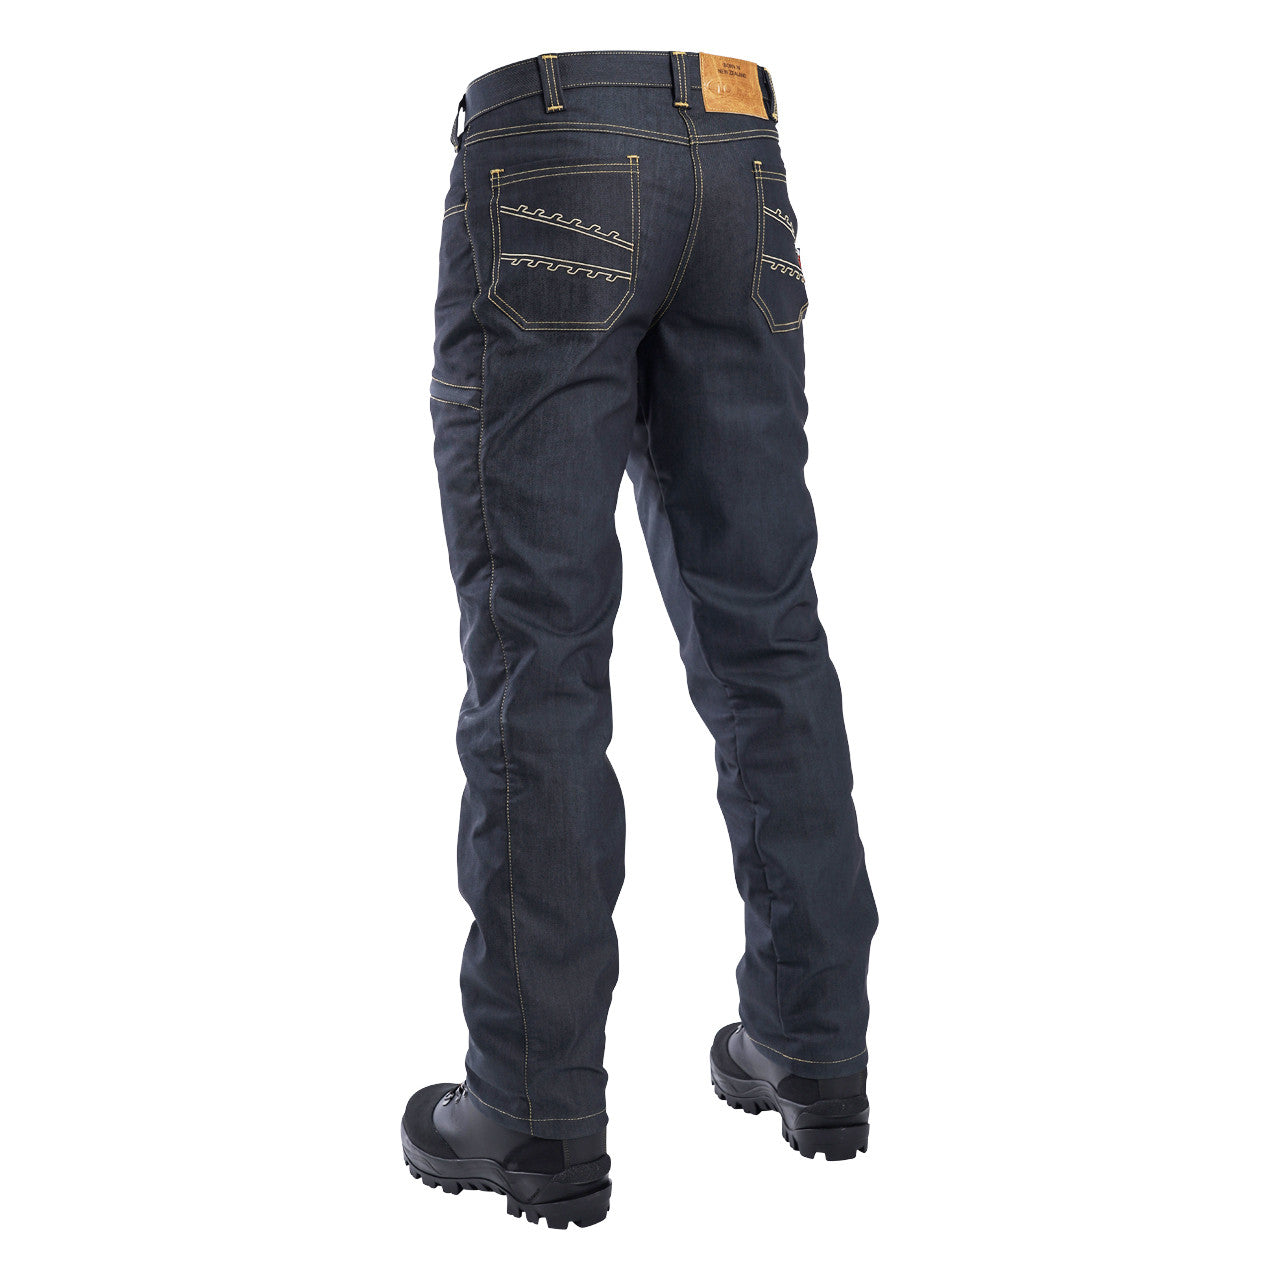 Clogger Spider Men's Climbing and Work Pants (Not Chainsaw Protective)